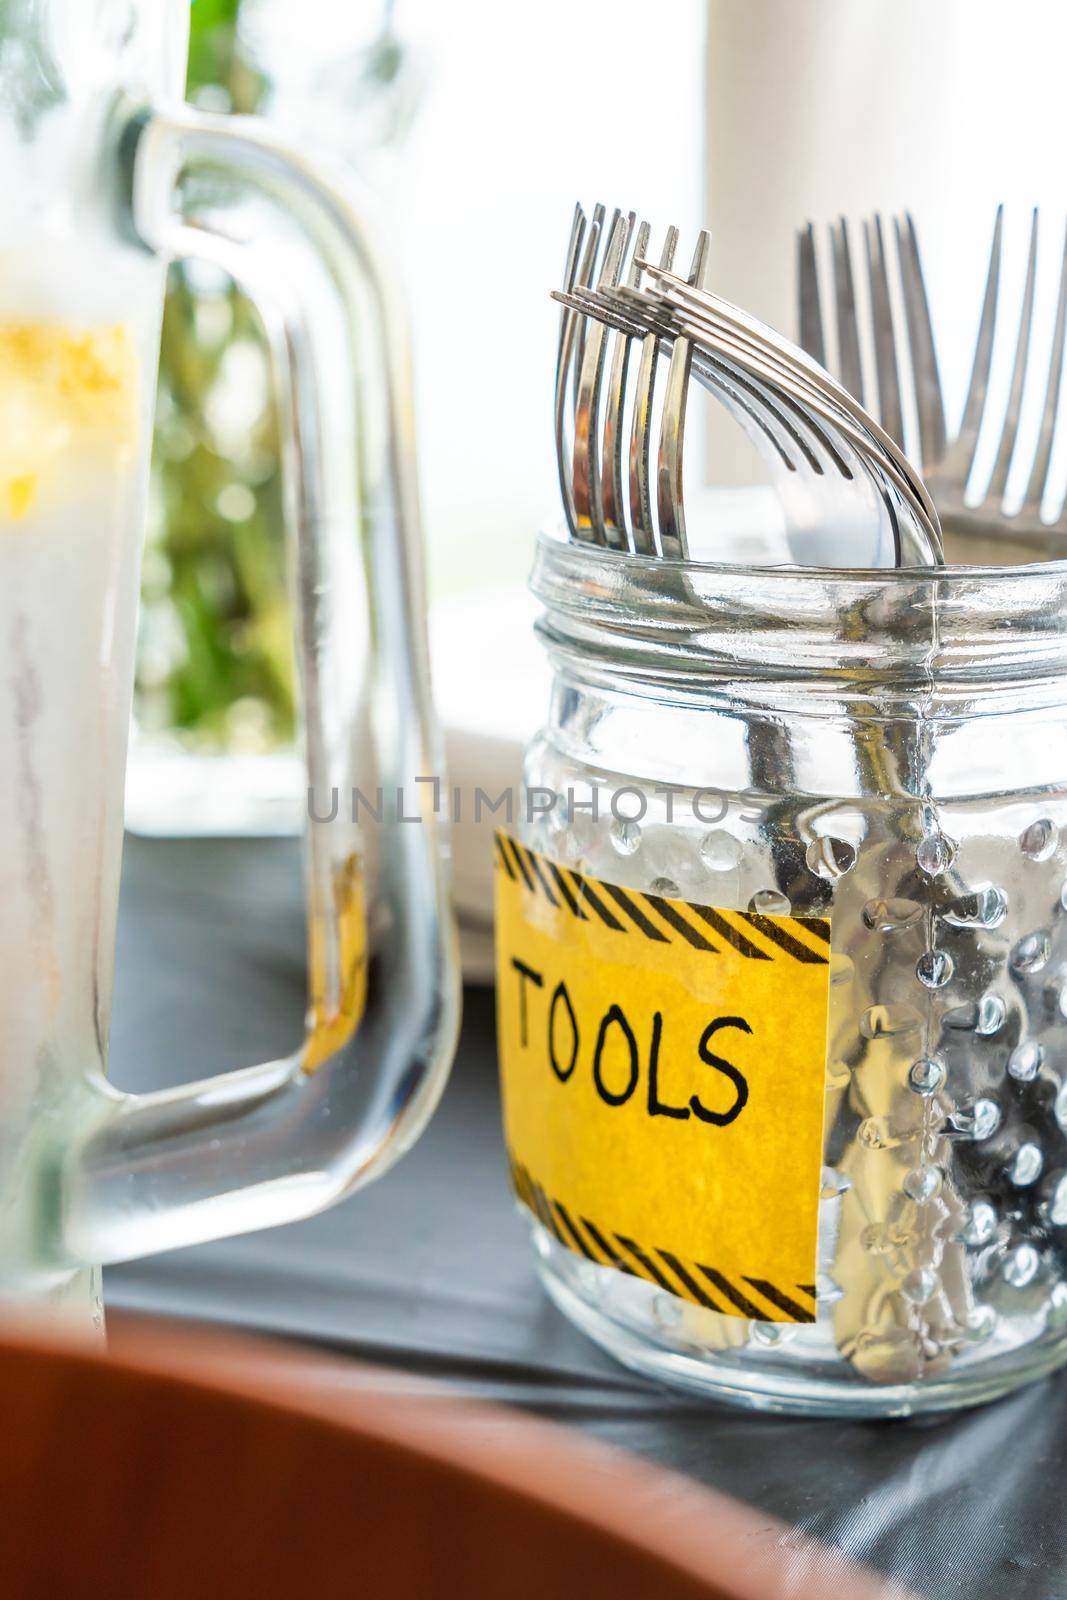 A close up photograph of forks in a textured glass mason jar on black table cloth with the word tools written on a yellow and black striped label for a kids birthday party with construction theme. by lapse_life